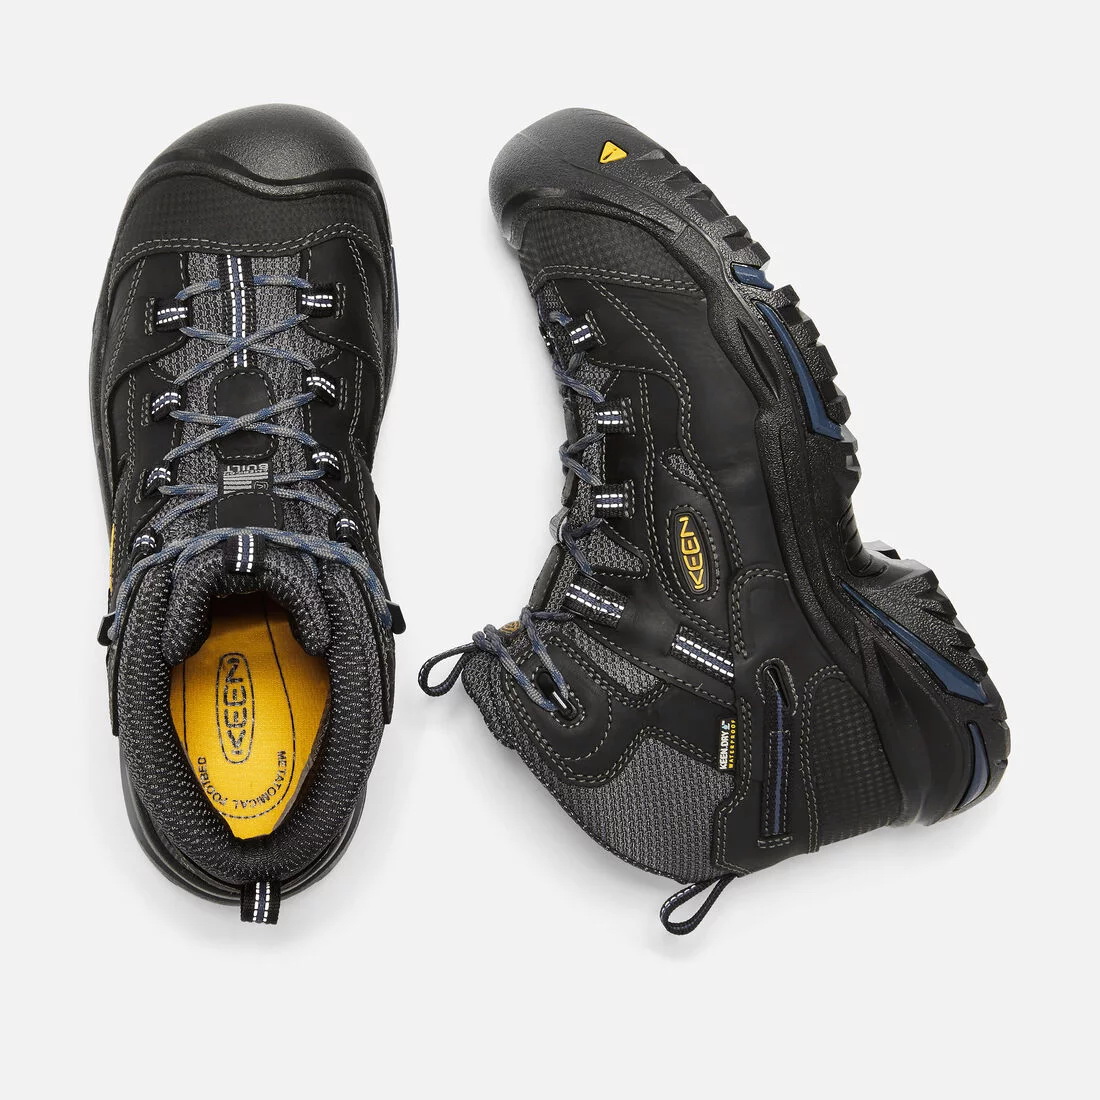 Keen BRADDOCK Series 1014605-9.5-D Work Boots, 9.5, D W, Raven, Leather, Lace-Up - 3